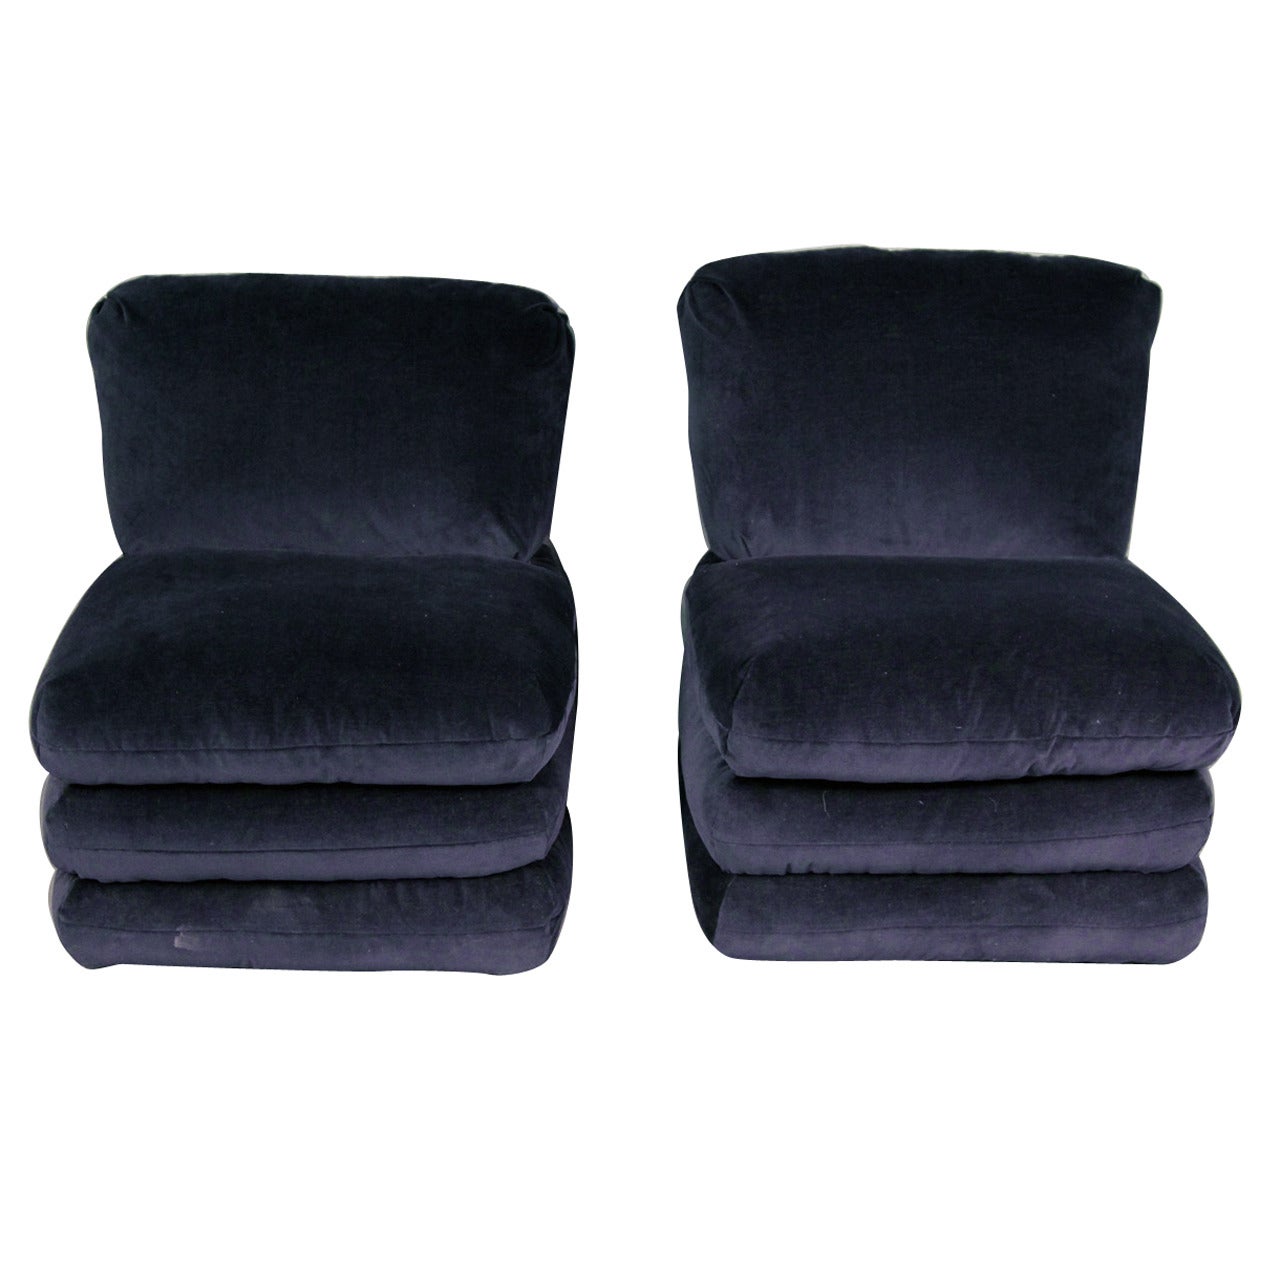 Vice Versa for Donghia Pair of Slipper Chairs For Sale